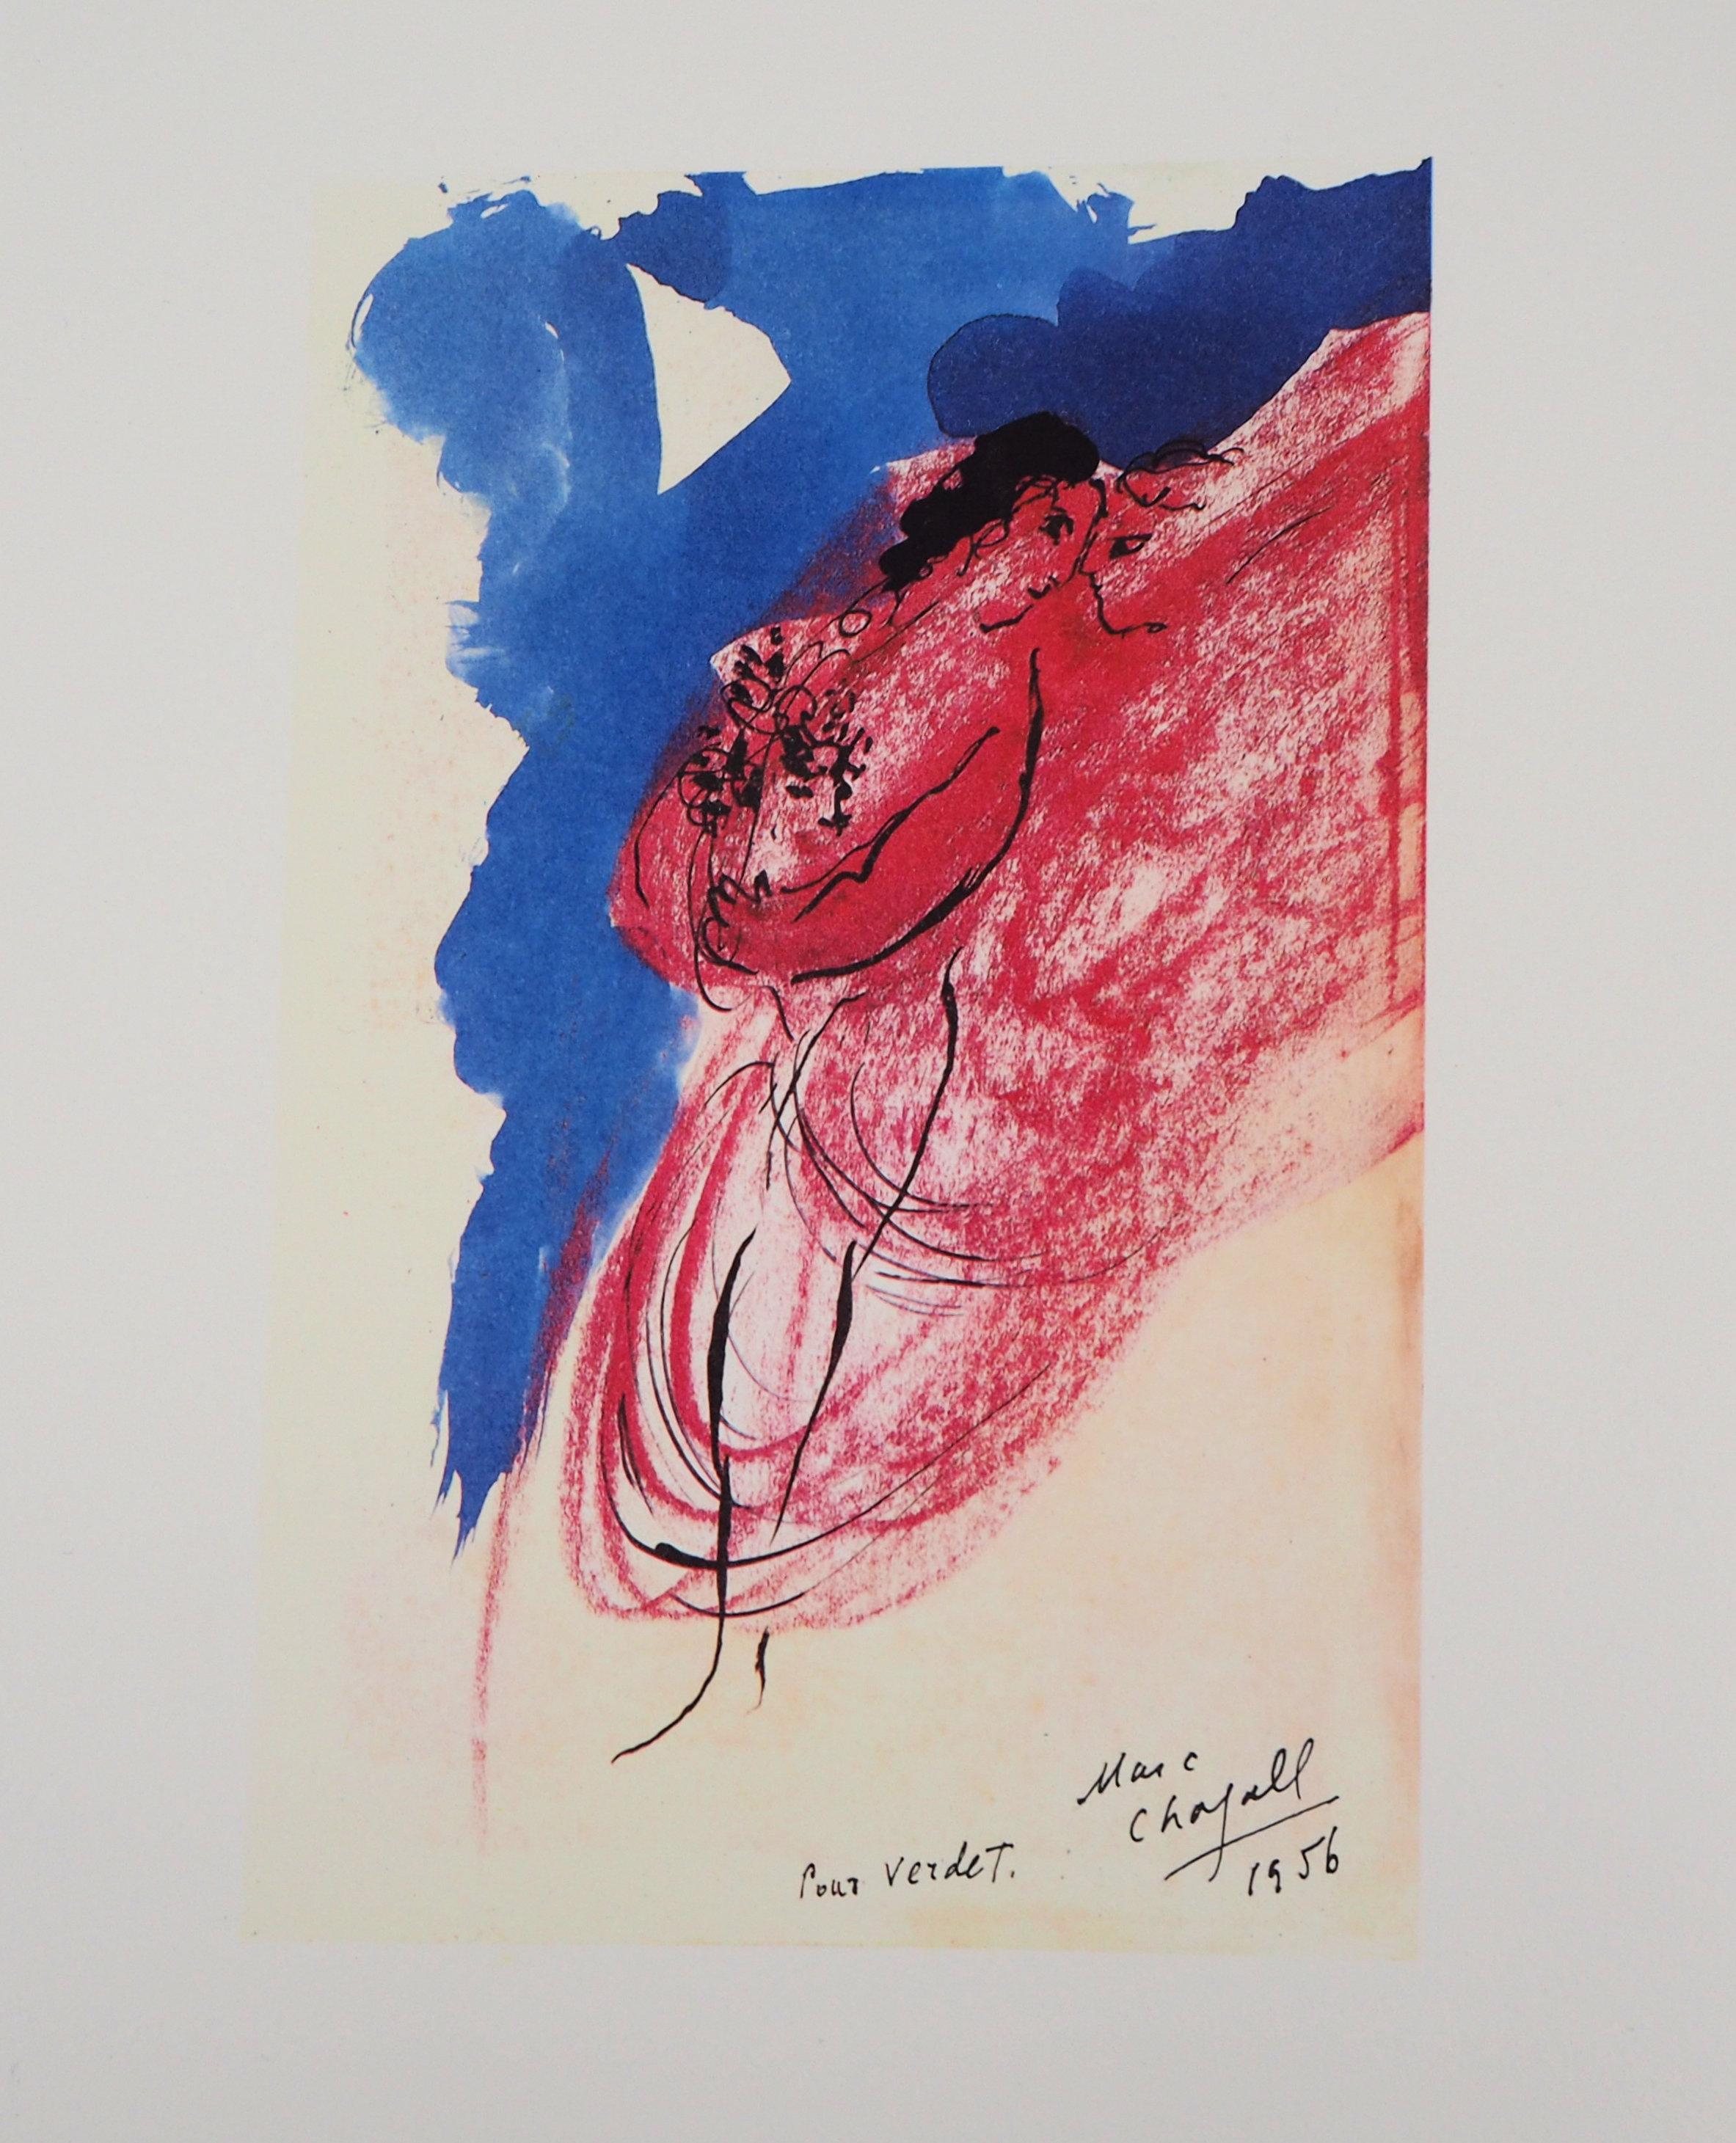 Marc CHAGALL (after)
The Lovers

Lithograph after a watercolor
Printed signature in the plate
On Rives vellum 33 x 27 cm (c. 13 x 11 inch)
From an edition of 150 unumbered proofs, edited by Jacques Boulan / Andre Verdet in 1992

Excellent condition